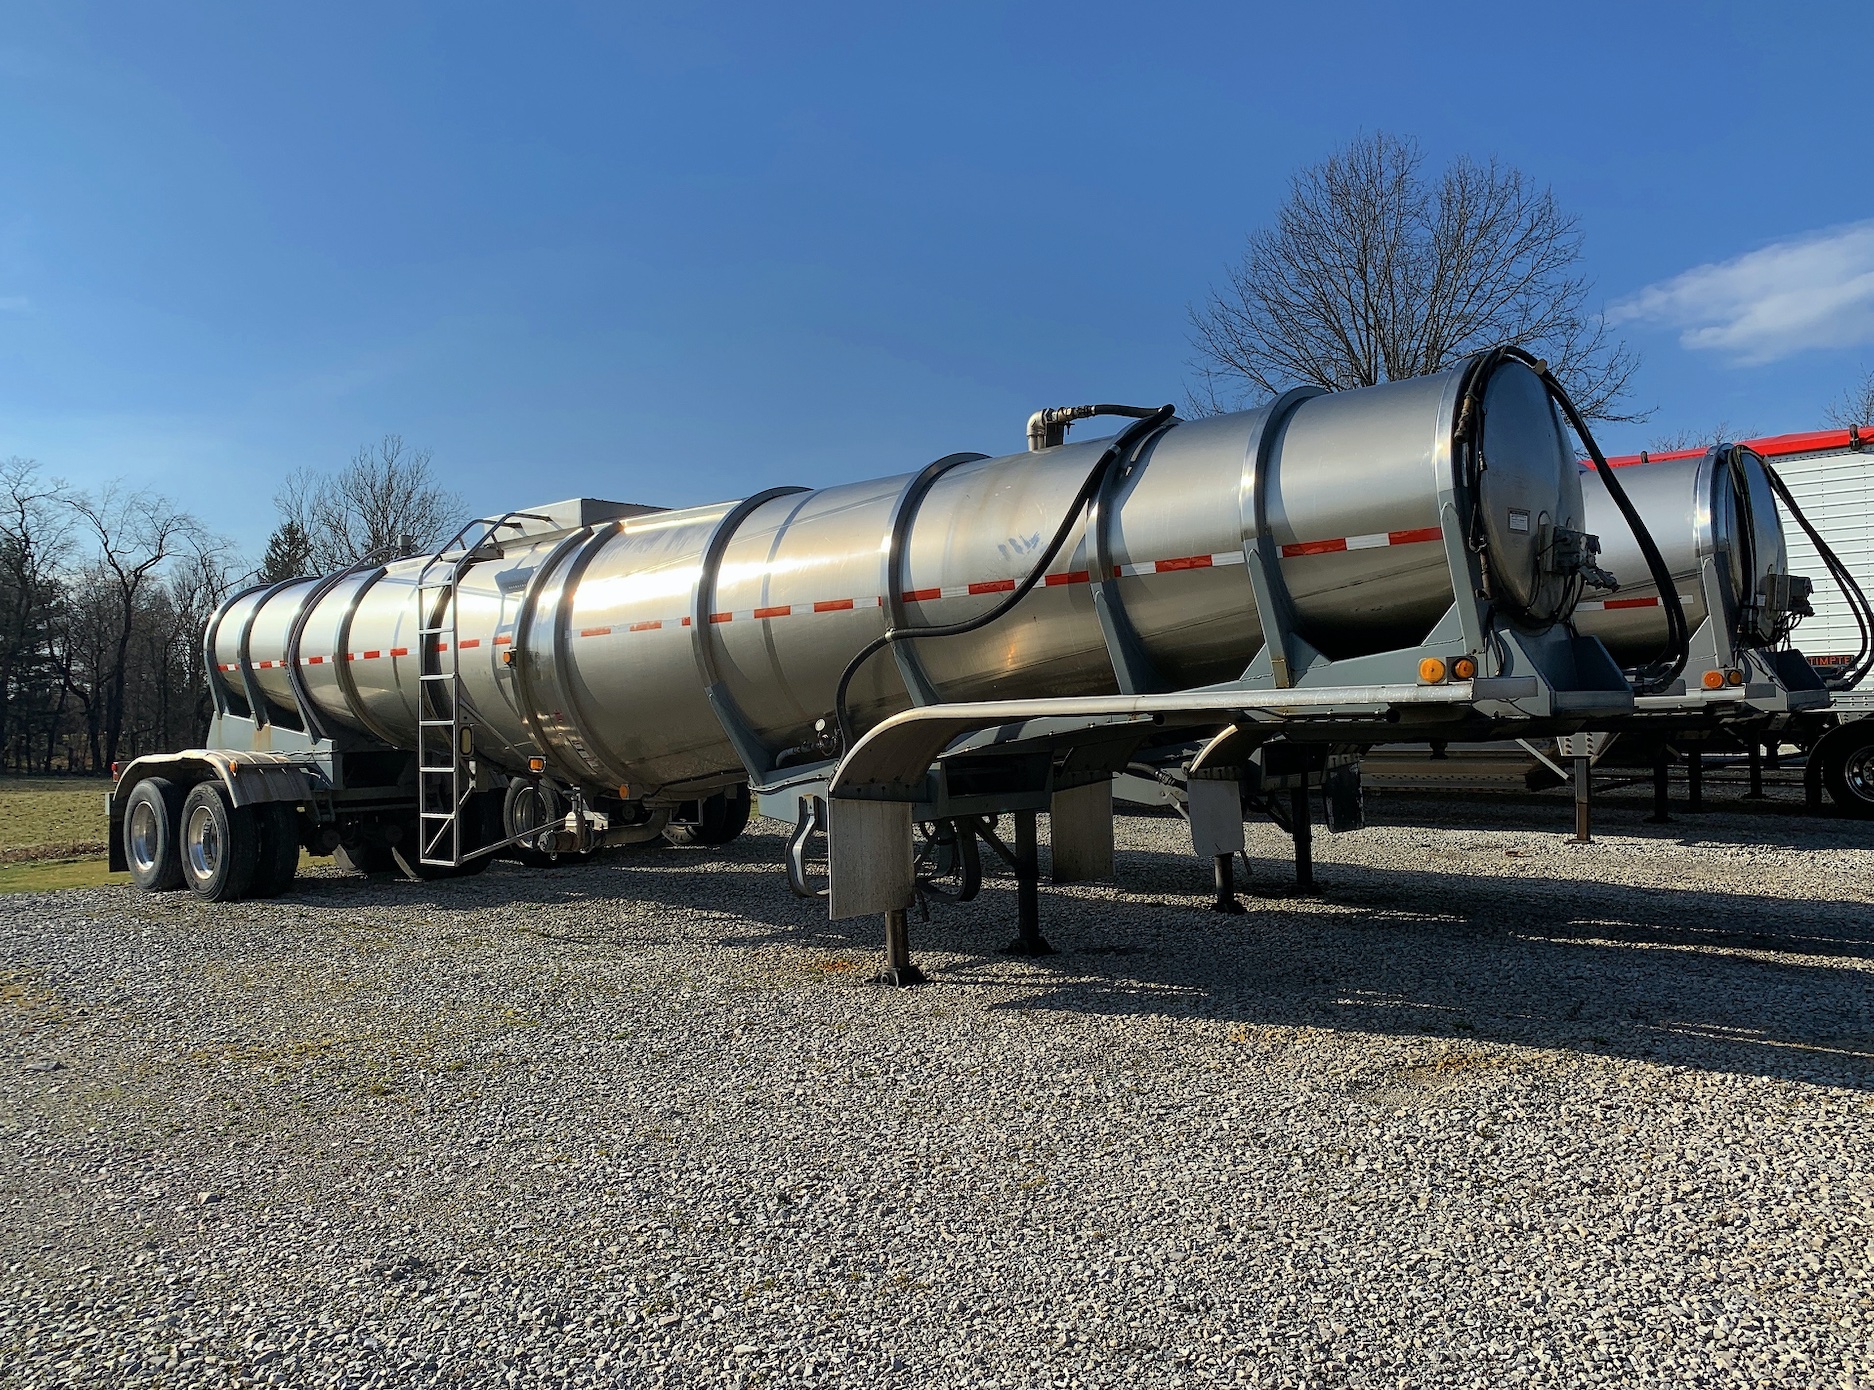 Two tanker-truck tanks without the trucks; image by Leslie Saunders, via Unsplash.com.